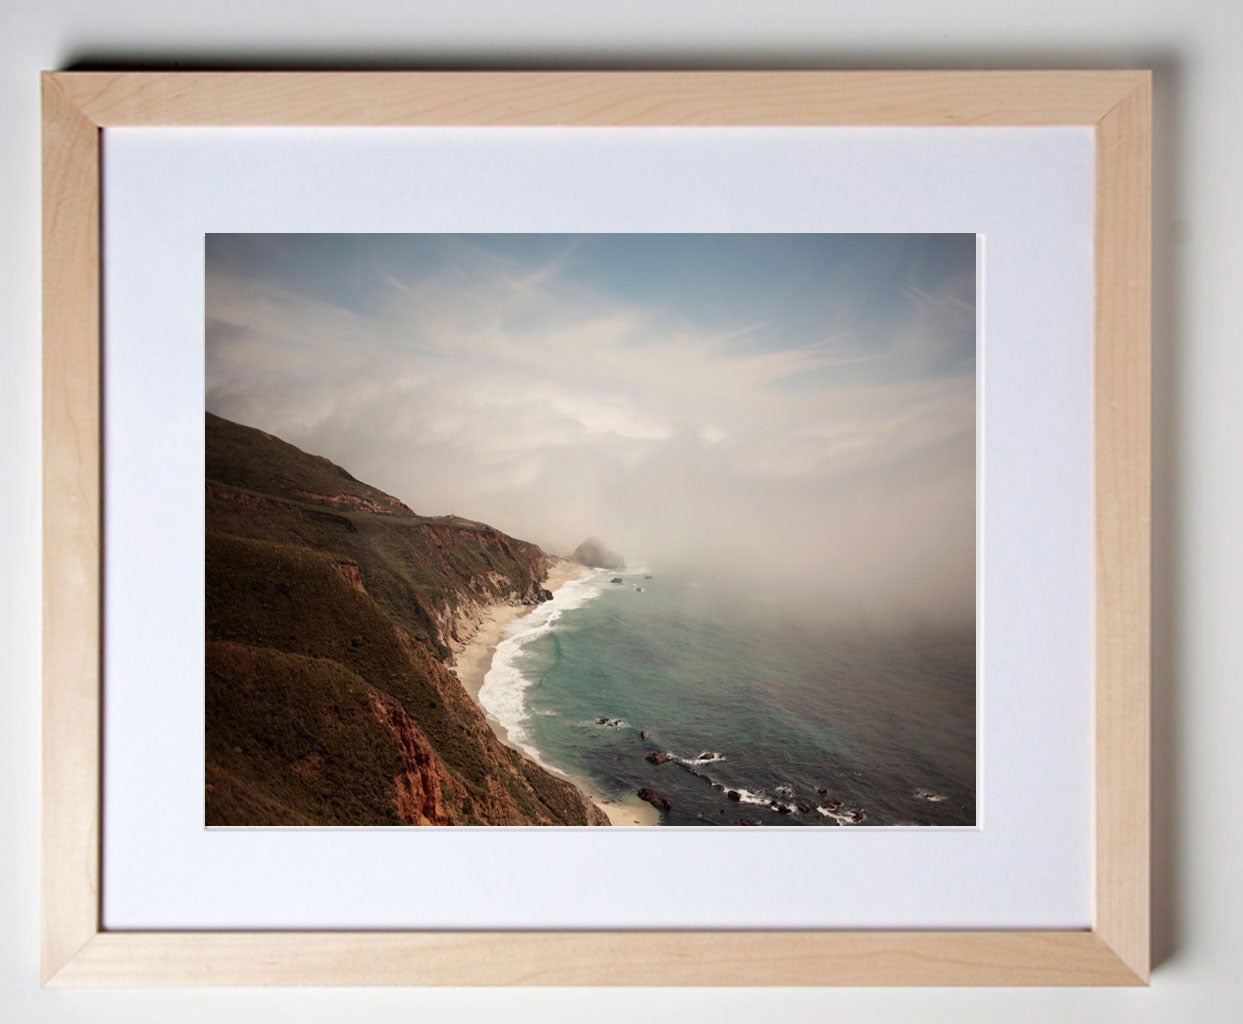 This price and size includes the frame. Framing options are: white, black, natural and aluminum.  Please contact the gallery for pricing of unframed prints and to choose your frame.
Limited edition giclee print on Hahnemuehle paper. Arrives with a